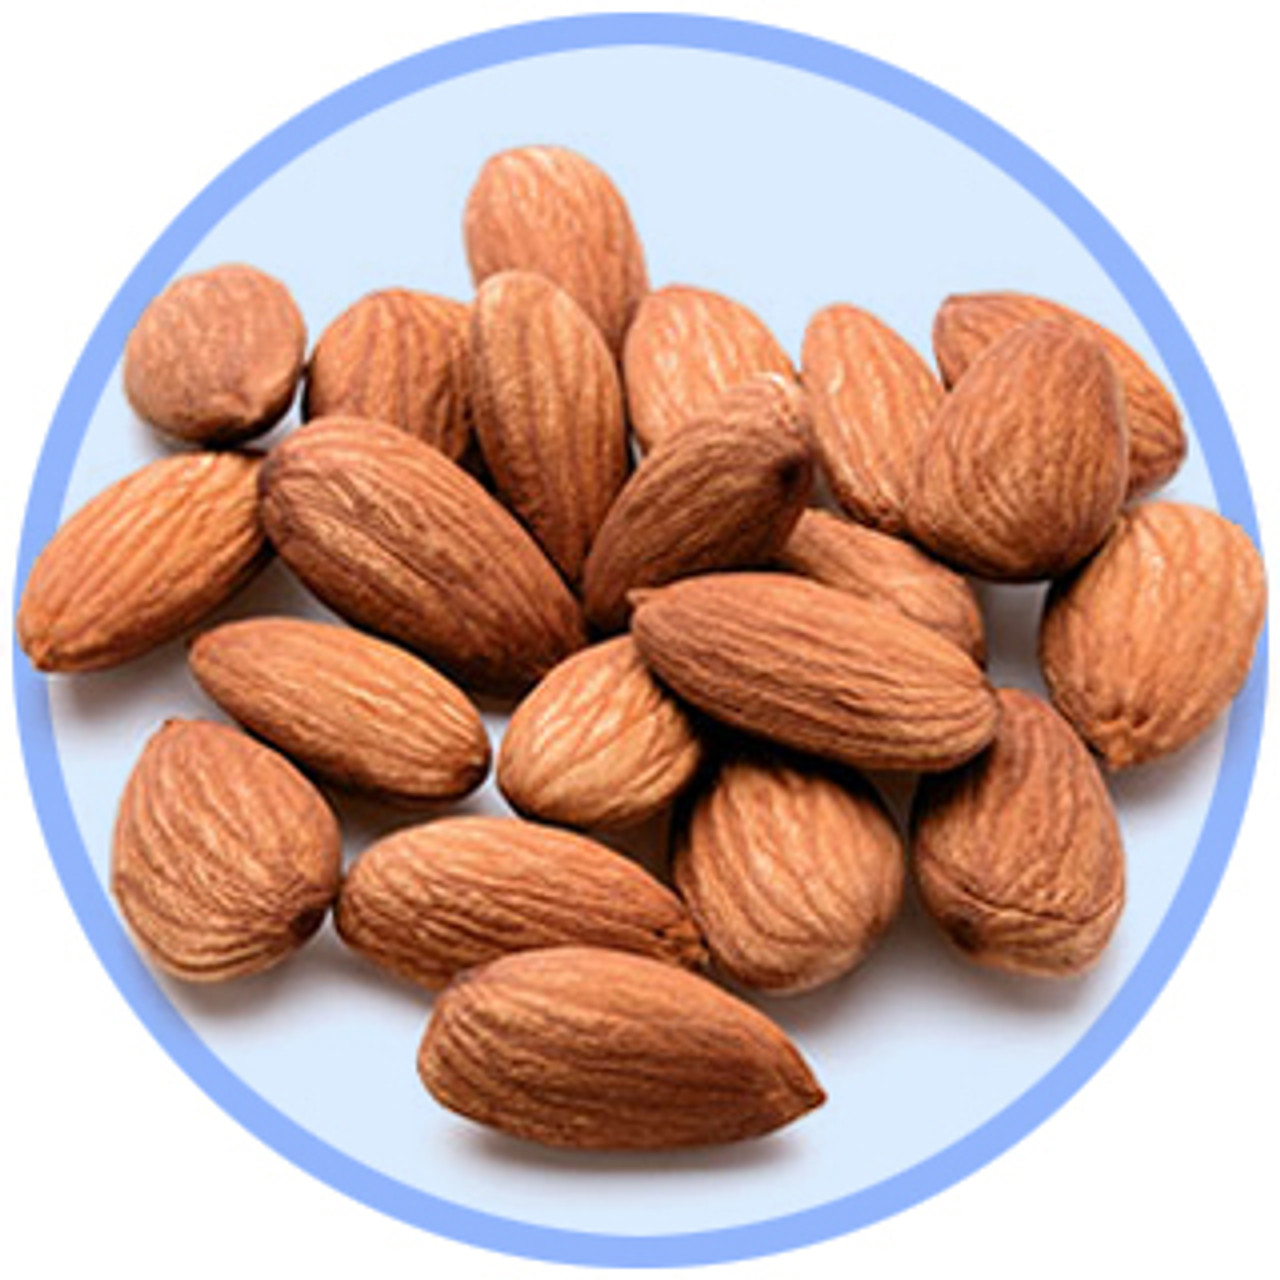 Bulk Nuts Wholesale Supplier, Importer and Distributor - Totally